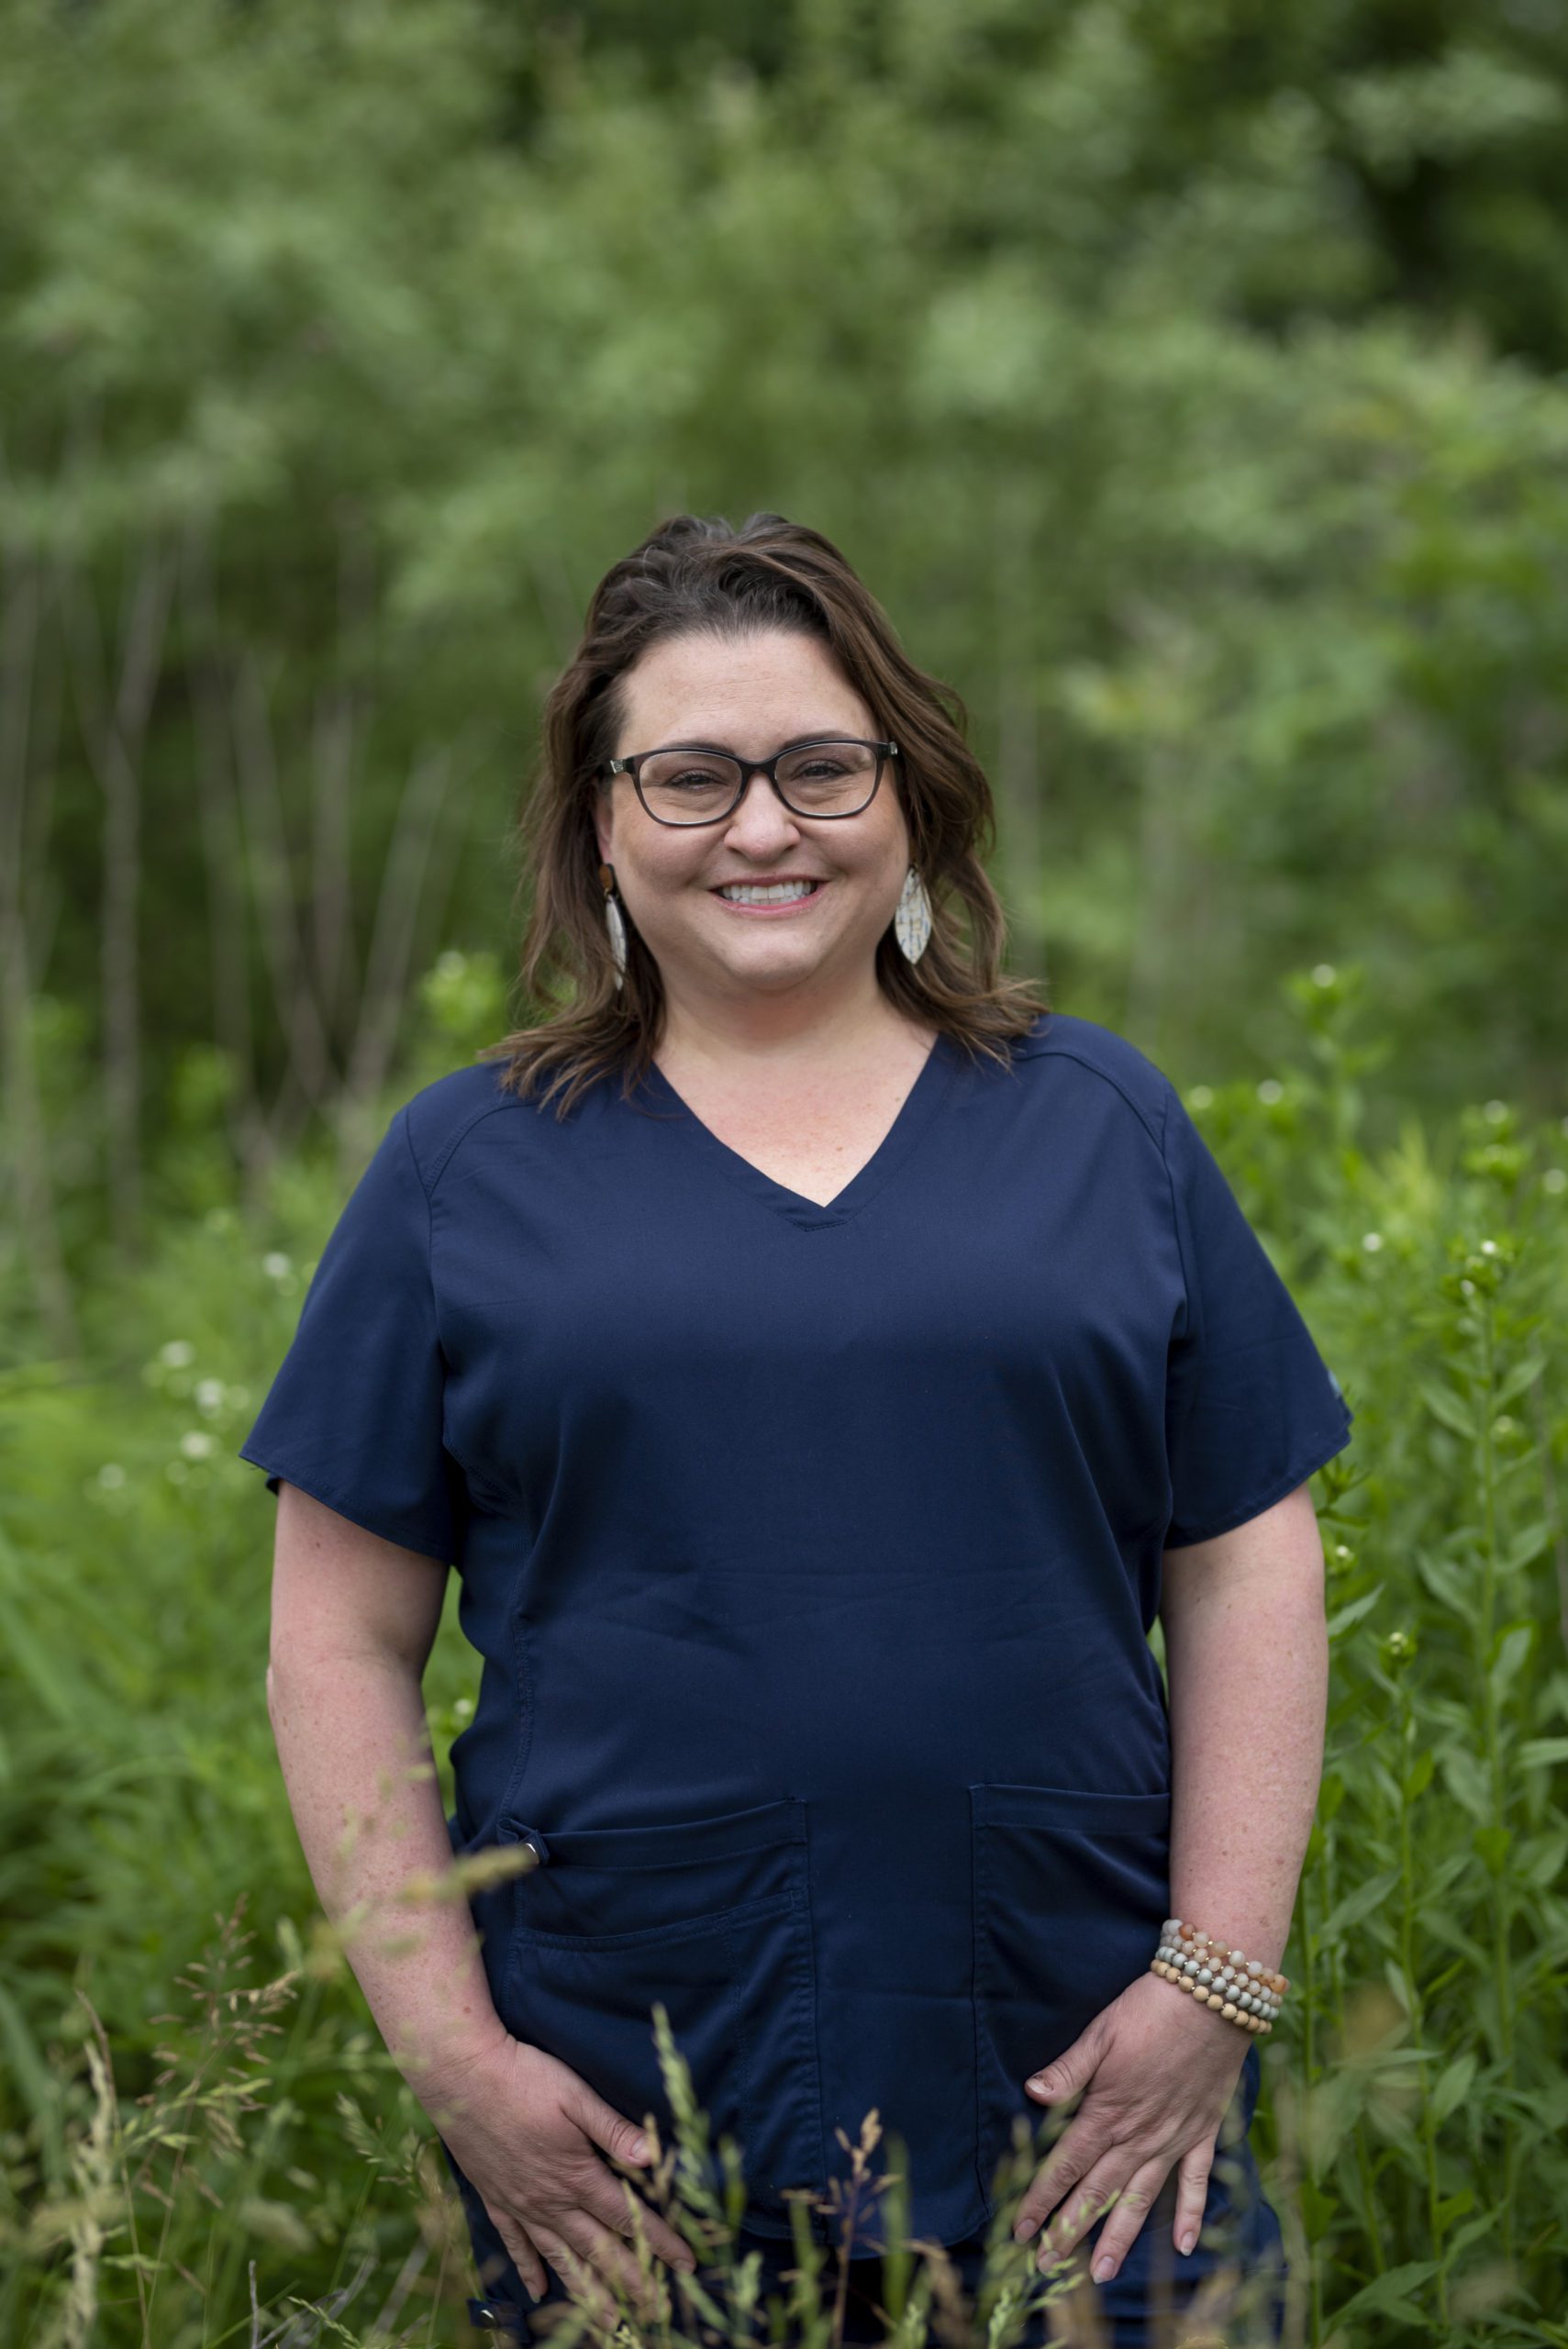 Carrie, dental assistant, wearing a blue shirt and black glasses amid a lush green forest in Greenfield, IN